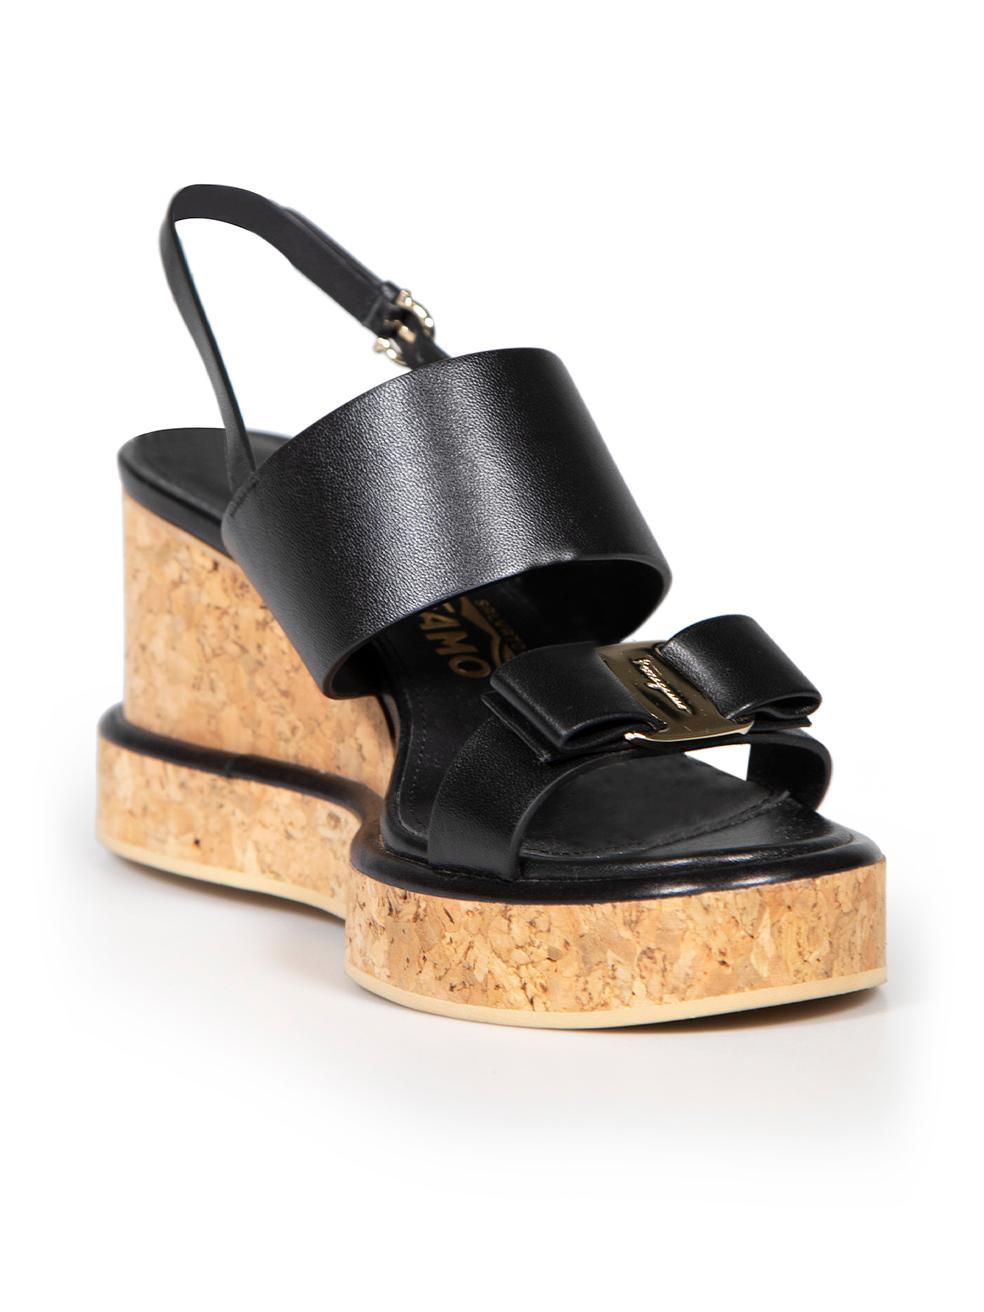 CONDITION is Never worn. No visible wear to shoes is evident on this new Salvatore Ferragamo designer resale item. These shoes come with original dust bag.
 
 
 
 Details
 
 
 Giudith model
 
 Black
 
 Leather
 
 Sandals
 
 Open toe
 
 Cork wedge